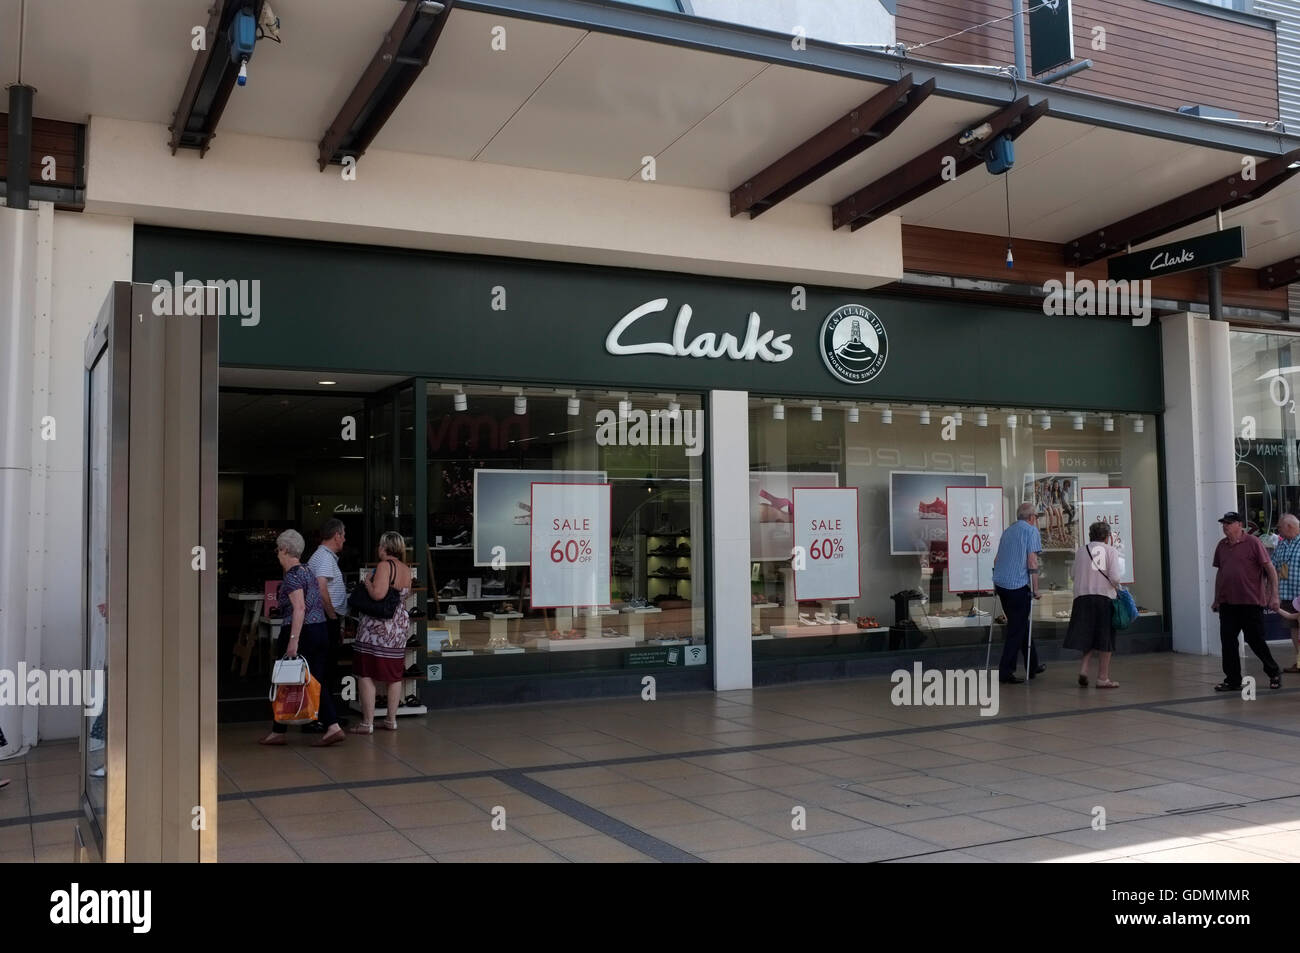 Clarks Shoe Shop Signs High Resolution Stock Photography and Images - Alamy